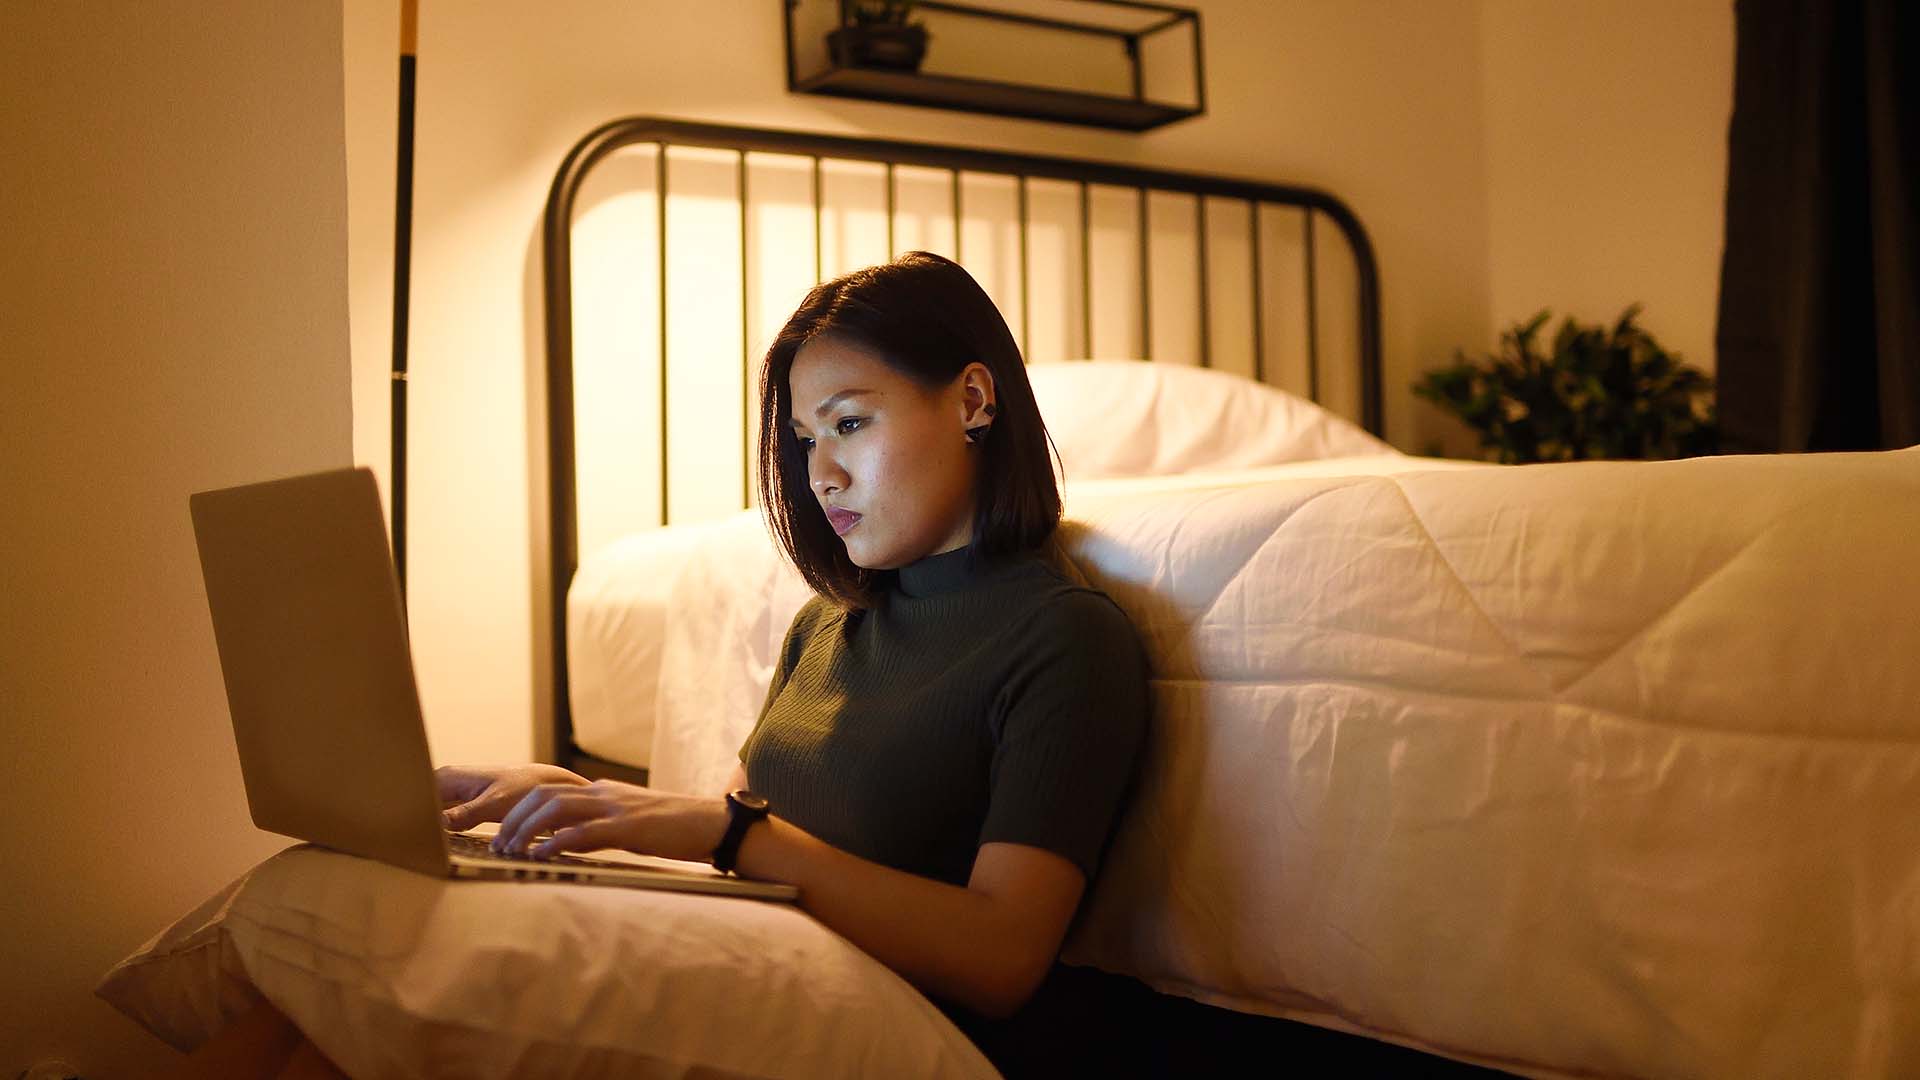 Woman leaning against bed staring at laptop propped on her lap